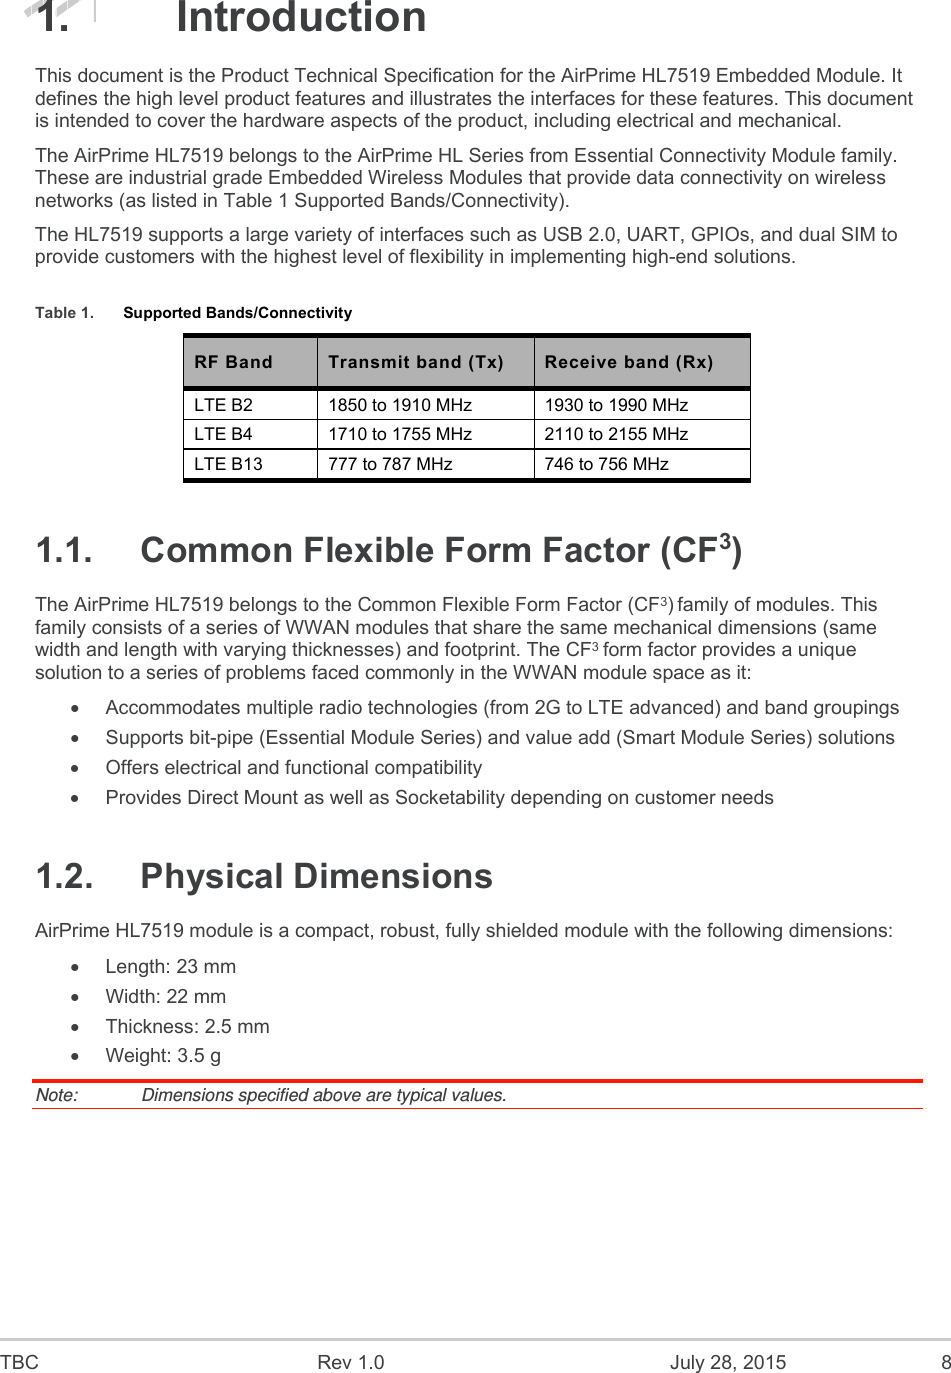  TBC  Rev 1.0  July 28, 2015  8 1.  Introduction This document is the Product Technical Specification for the AirPrime HL7519 Embedded Module. It defines the high level product features and illustrates the interfaces for these features. This document is intended to cover the hardware aspects of the product, including electrical and mechanical. The AirPrime HL7519 belongs to the AirPrime HL Series from Essential Connectivity Module family. These are industrial grade Embedded Wireless Modules that provide data connectivity on wireless networks (as listed in Table 1 Supported Bands/Connectivity).  The HL7519 supports a large variety of interfaces such as USB 2.0, UART, GPIOs, and dual SIM to provide customers with the highest level of flexibility in implementing high-end solutions. Table 1.  Supported Bands/Connectivity RF Band  Transmit band (Tx)  Receive band (Rx) LTE B2  1850 to 1910 MHz  1930 to 1990 MHz LTE B4  1710 to 1755 MHz  2110 to 2155 MHz LTE B13  777 to 787 MHz  746 to 756 MHz 1.1.  Common Flexible Form Factor (CF3)  The AirPrime HL7519 belongs to the Common Flexible Form Factor (CF3) family of modules. This family consists of a series of WWAN modules that share the same mechanical dimensions (same width and length with varying thicknesses) and footprint. The CF3 form factor provides a unique solution to a series of problems faced commonly in the WWAN module space as it:   Accommodates multiple radio technologies (from 2G to LTE advanced) and band groupings   Supports bit-pipe (Essential Module Series) and value add (Smart Module Series) solutions   Offers electrical and functional compatibility    Provides Direct Mount as well as Socketability depending on customer needs 1.2.  Physical Dimensions AirPrime HL7519 module is a compact, robust, fully shielded module with the following dimensions:   Length: 23 mm   Width: 22 mm   Thickness: 2.5 mm   Weight: 3.5 g Note:   Dimensions specified above are typical values. 